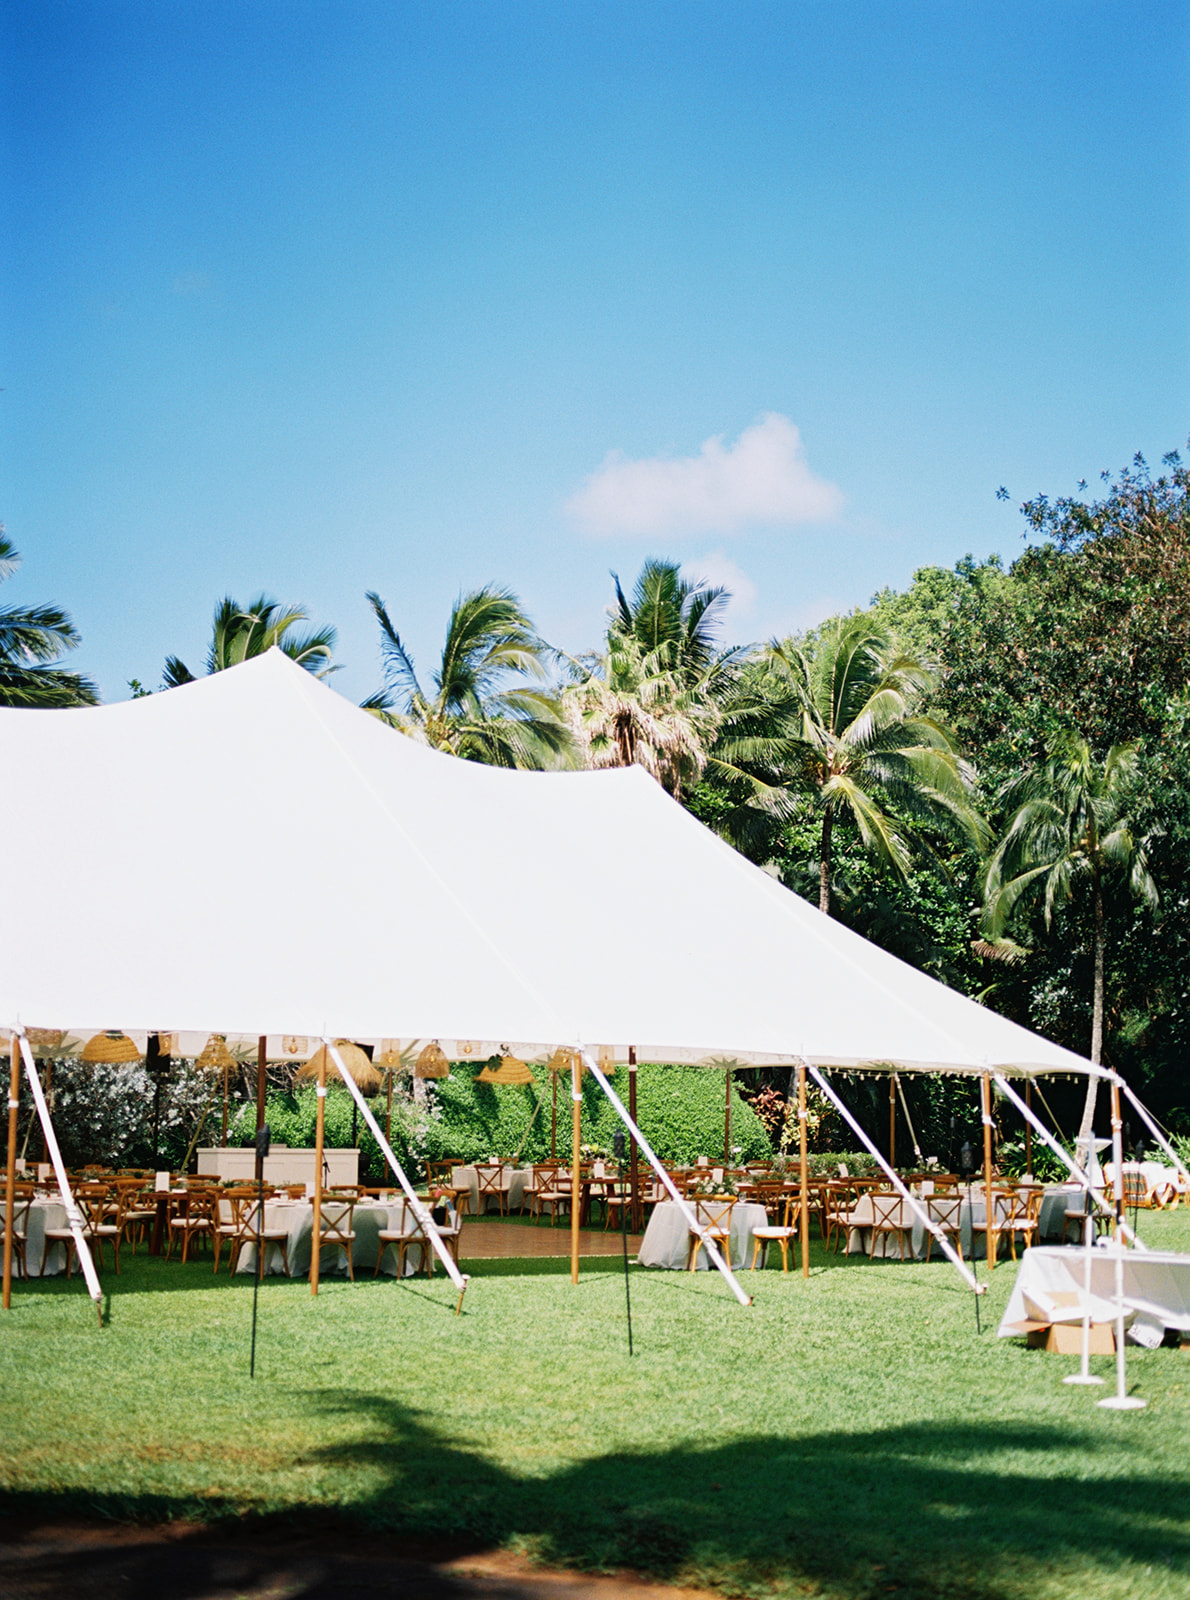 White event tent set up on a lawn with tables and chairs arranged for a gathering, palm trees in the background.